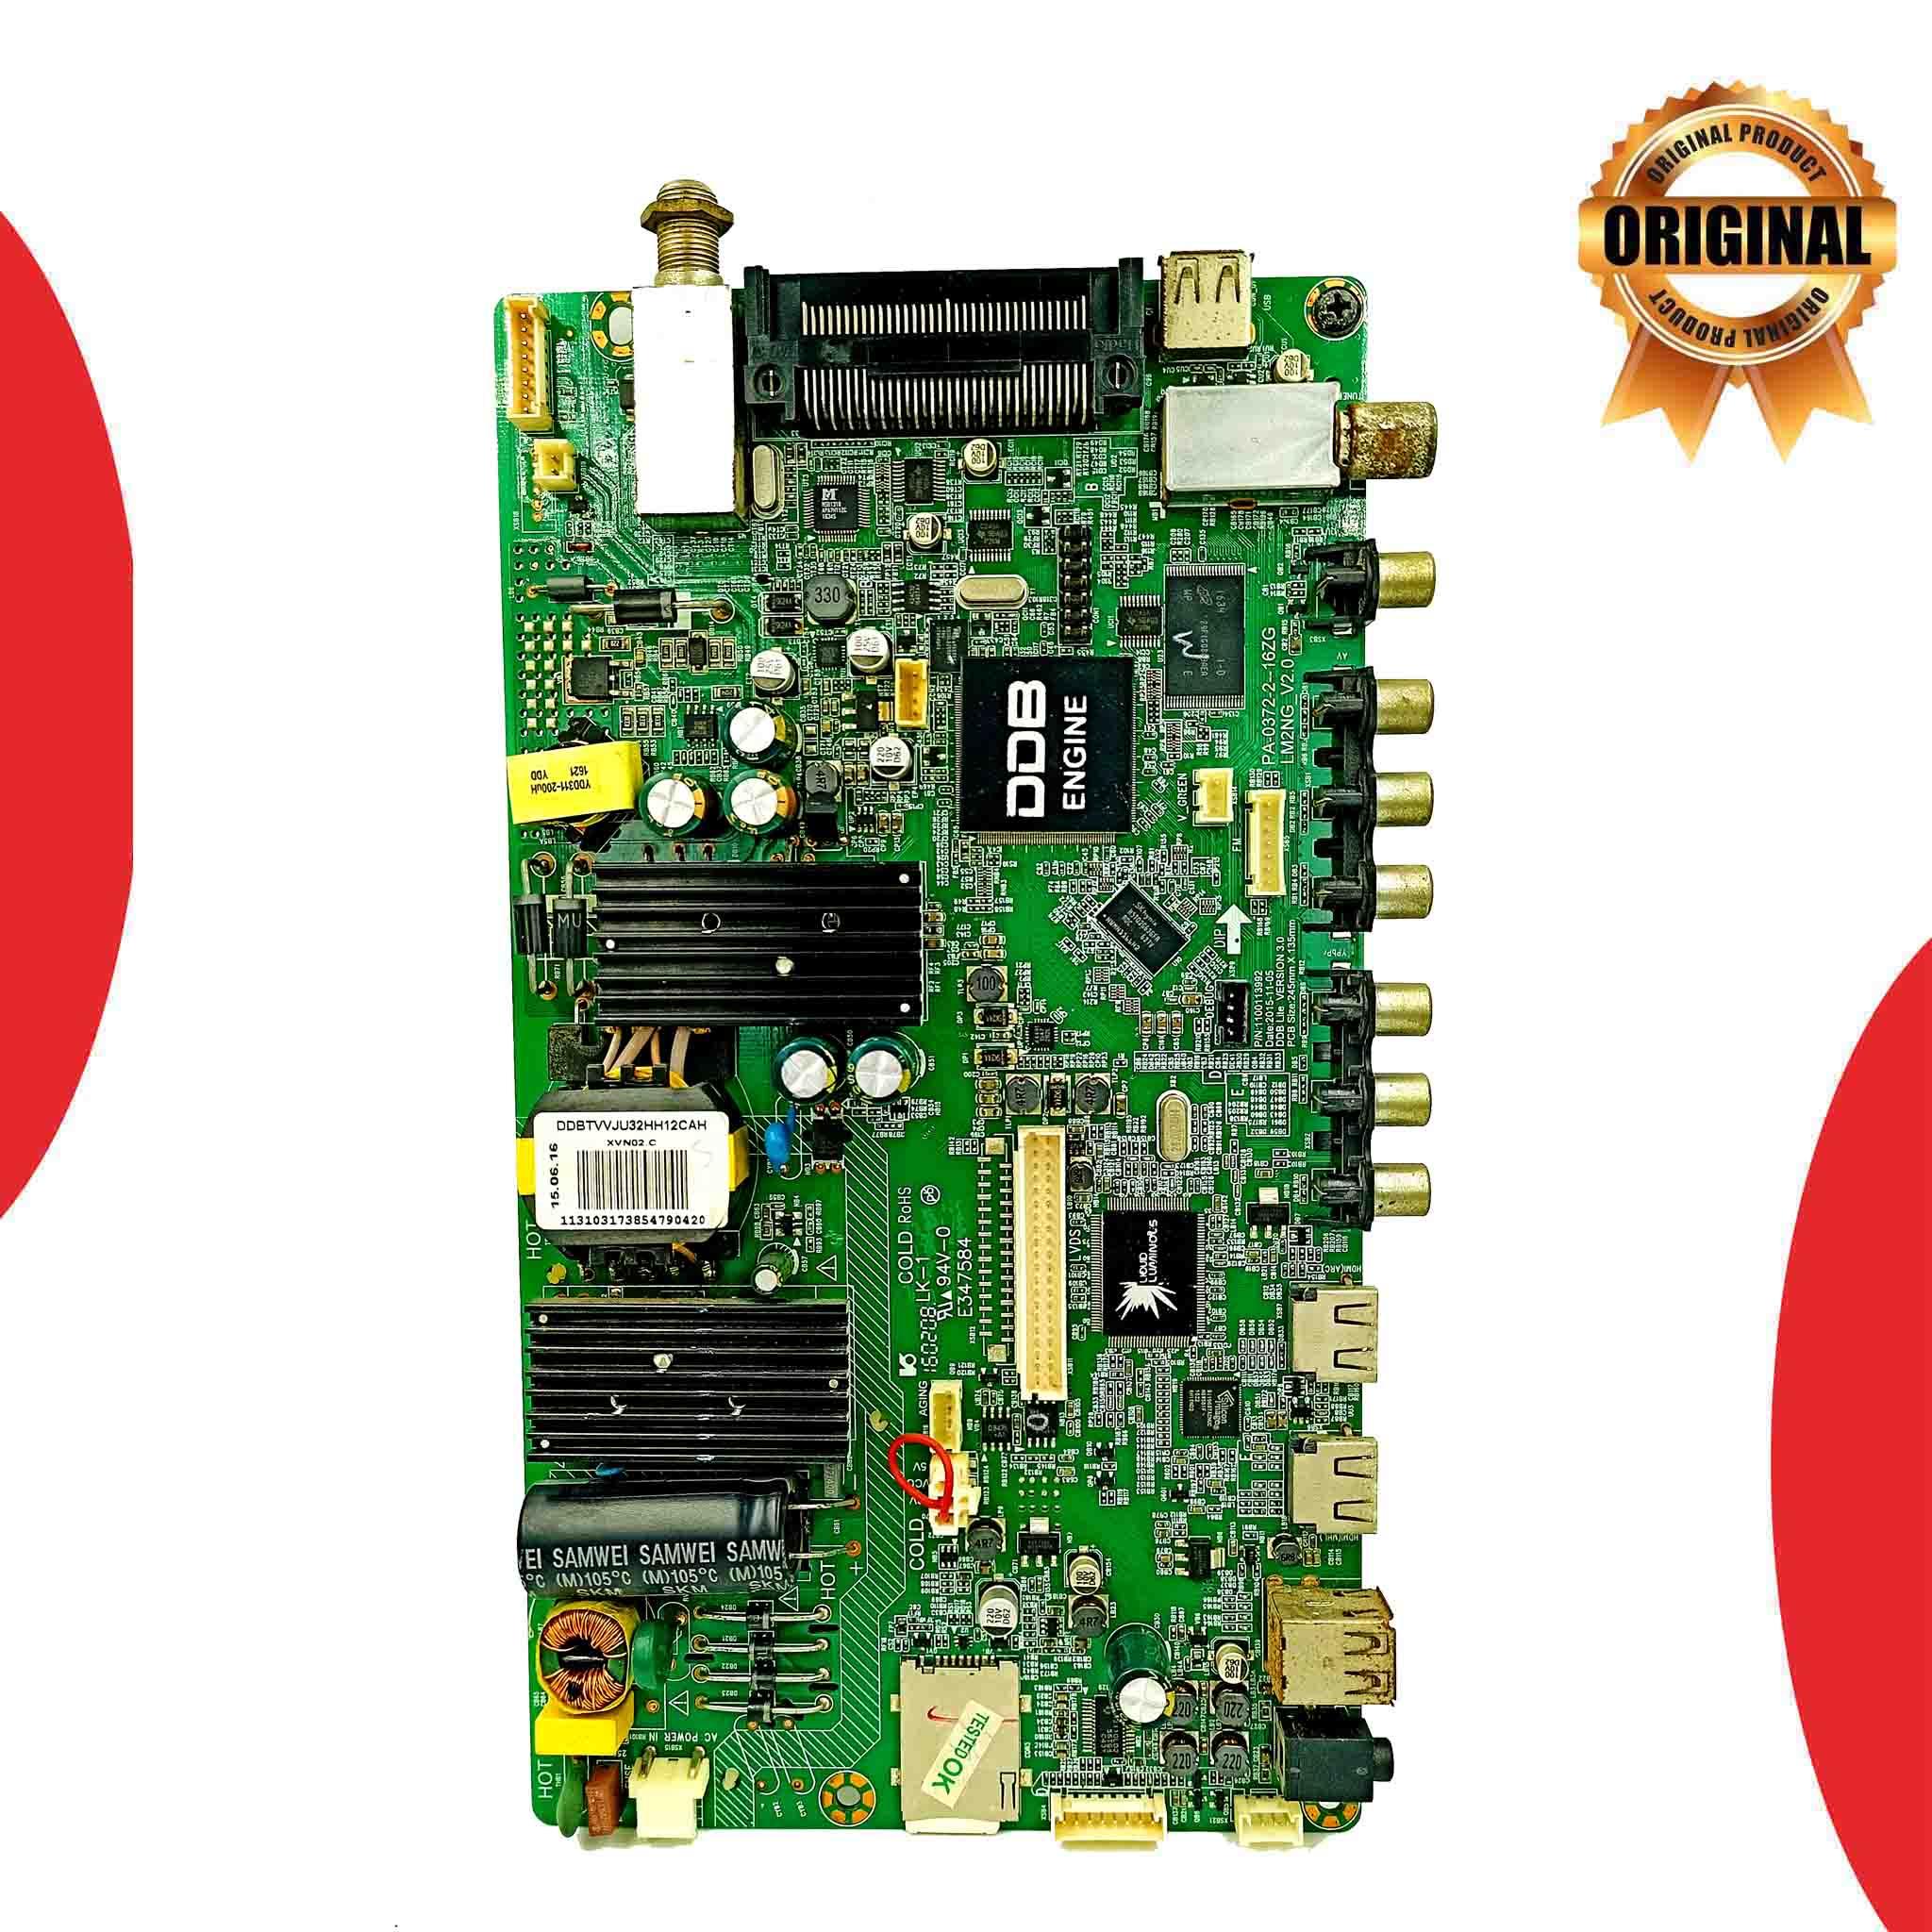 Model DDBTVVMA32HH12CAHM Videocon LED TV Motherboard - Great Bharat Electronics